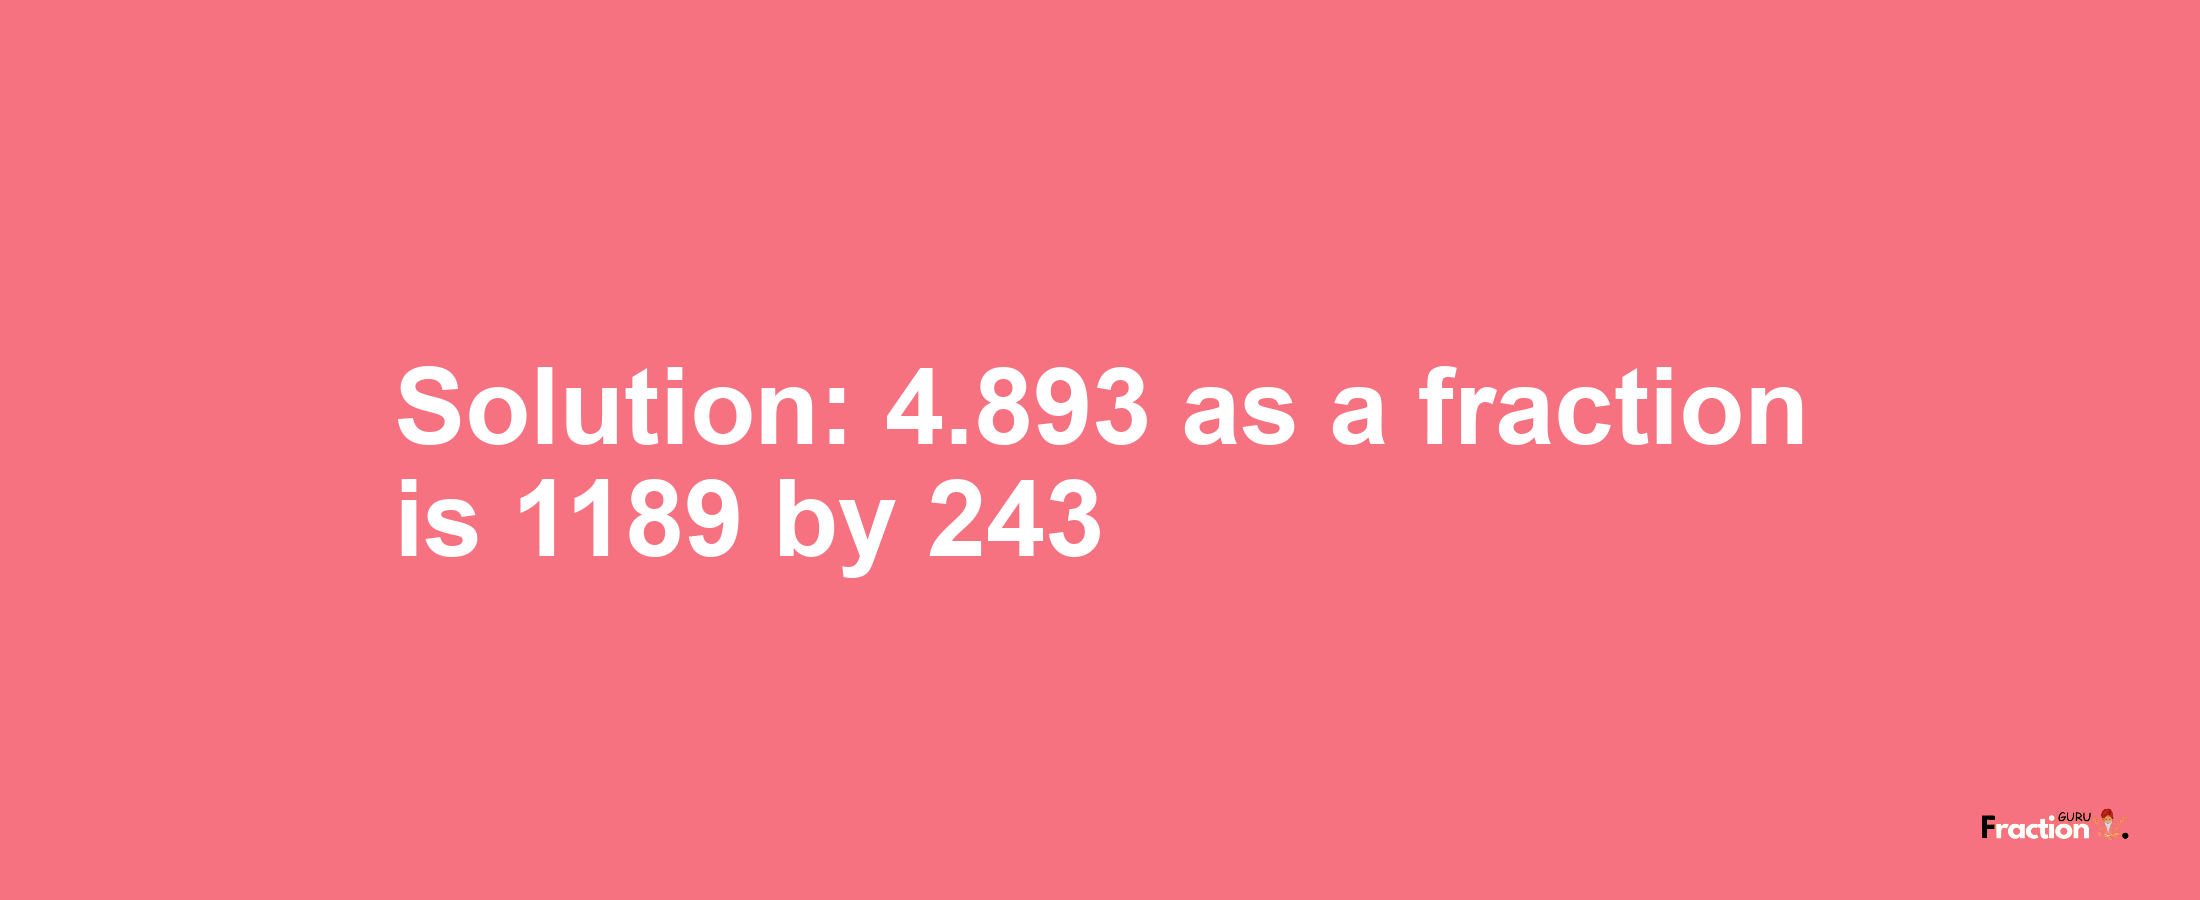 Solution:4.893 as a fraction is 1189/243